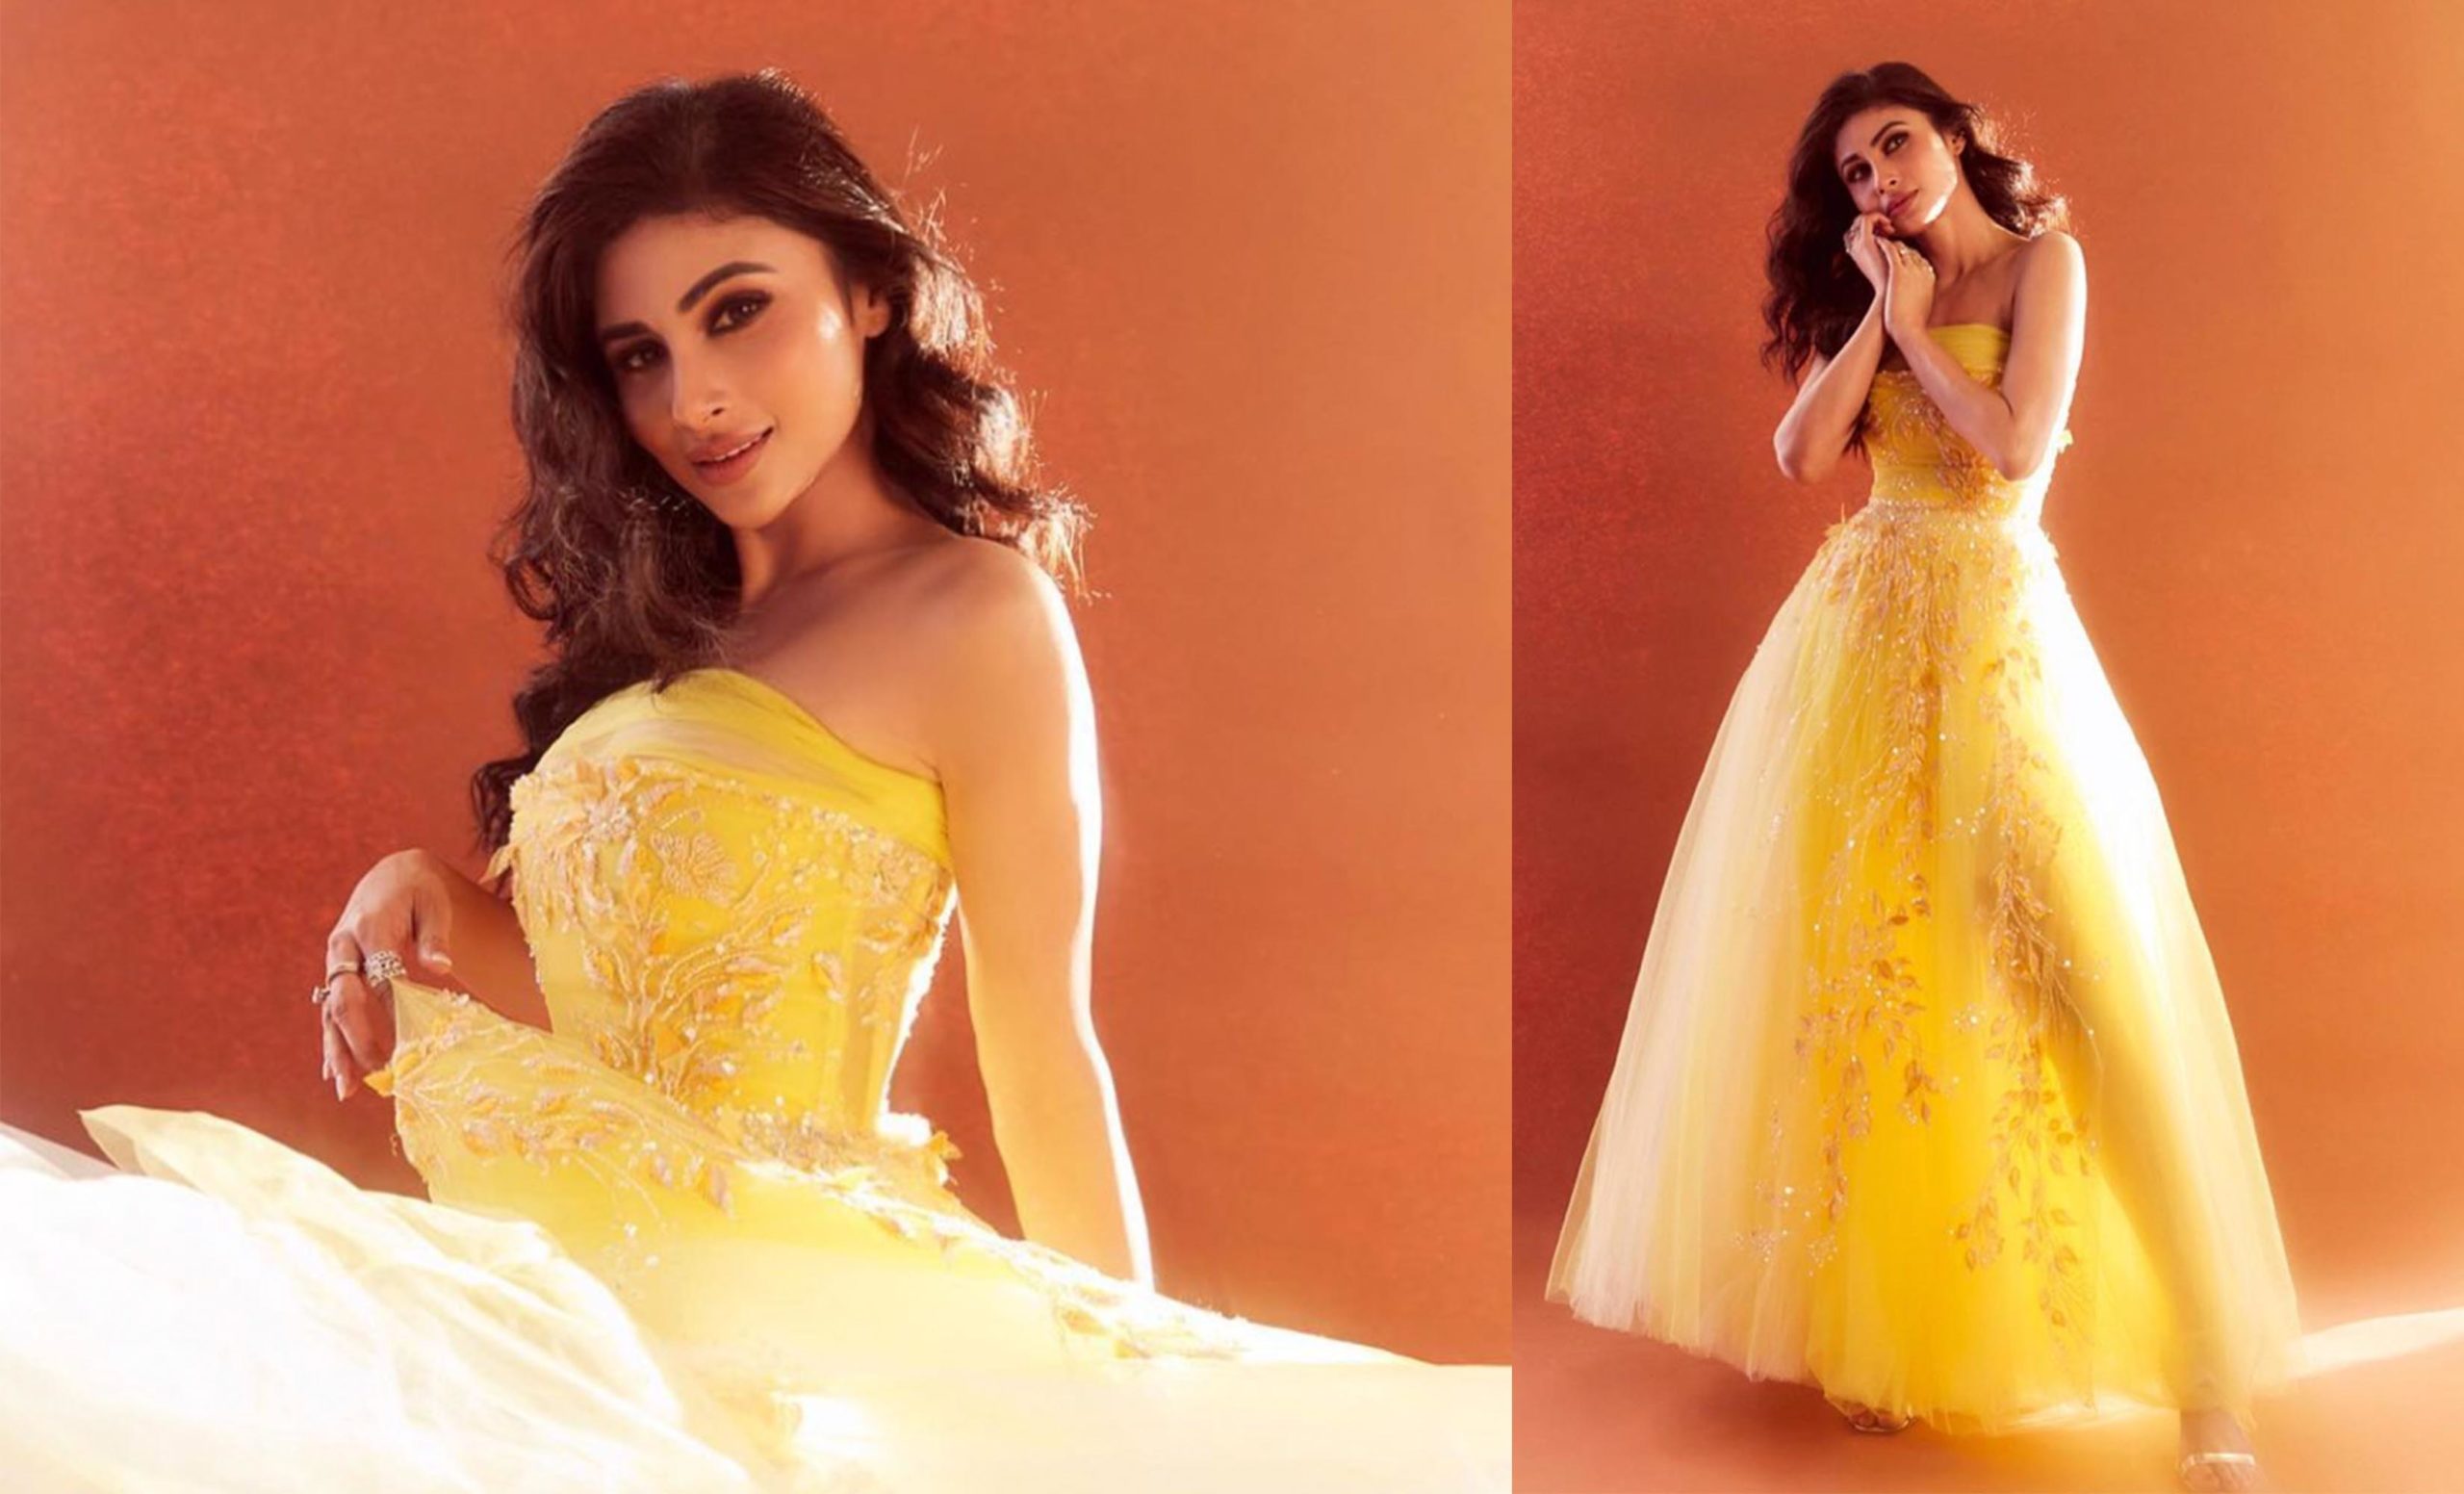 Mouni Roy Takes A Dip In Sunny Yellow For Her Latest Photoshoot